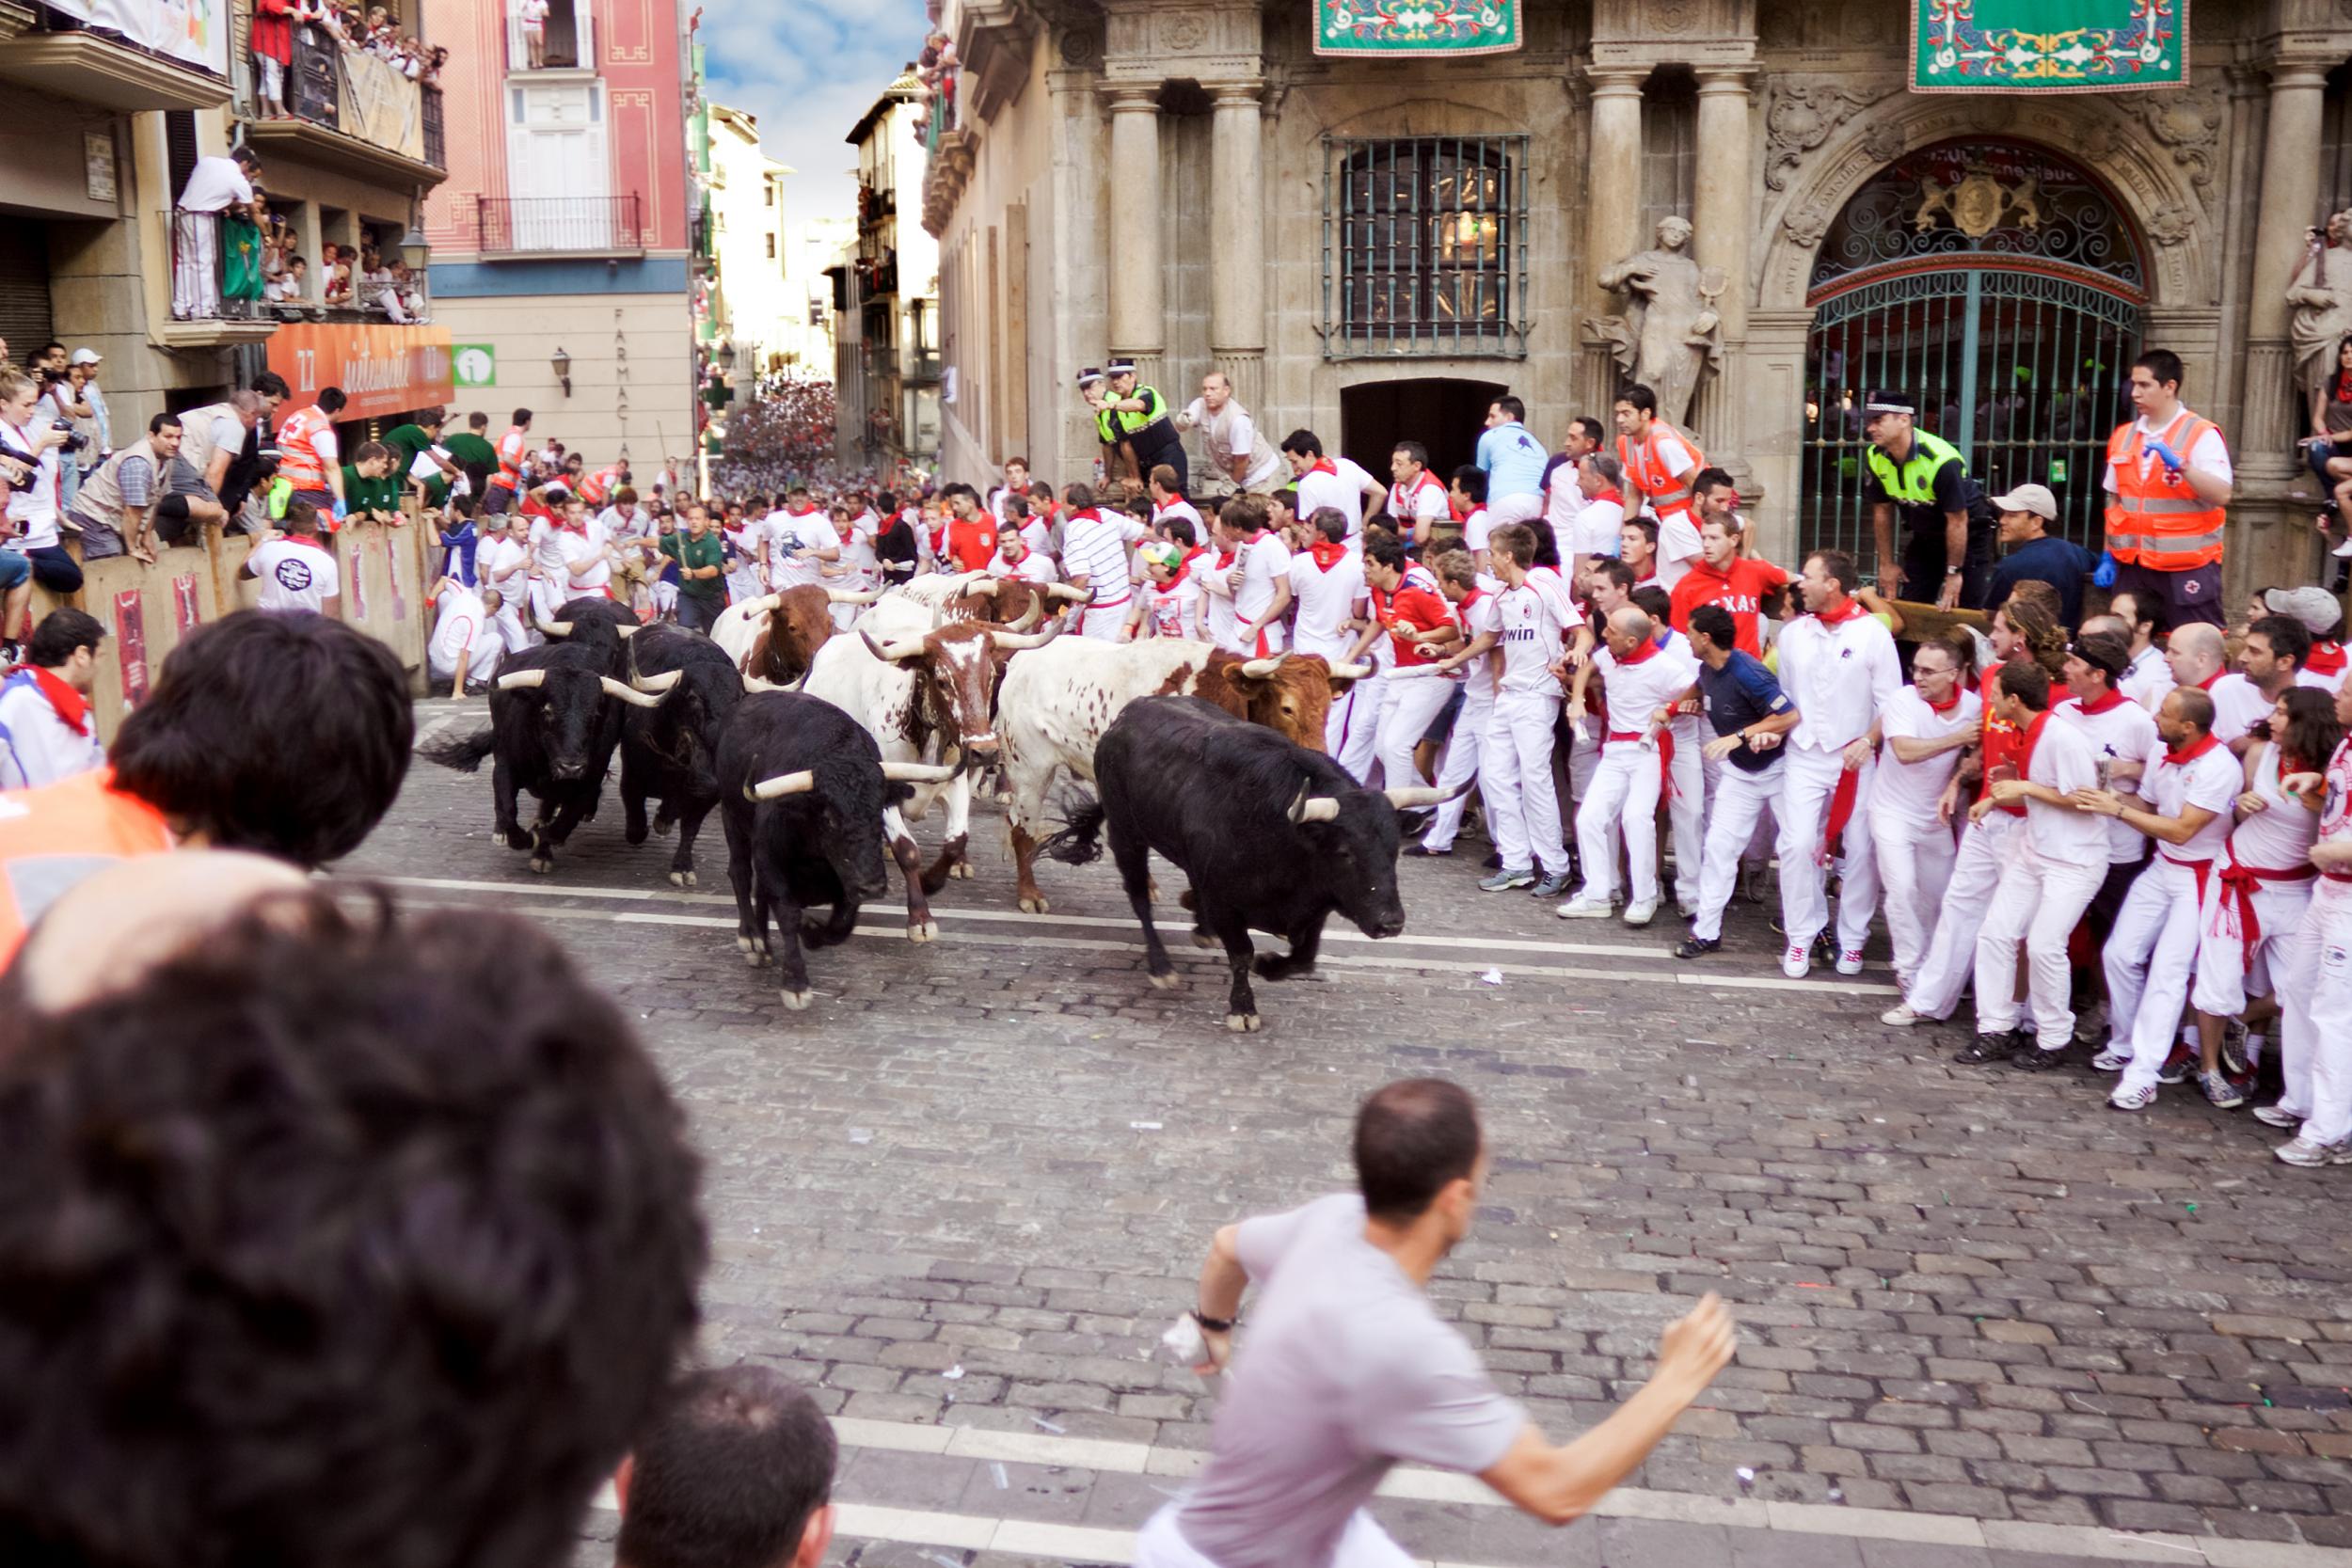 The annual Pamplona bull run has seen an increasing number of women report incidents of sexual assault, such as groping (istock)